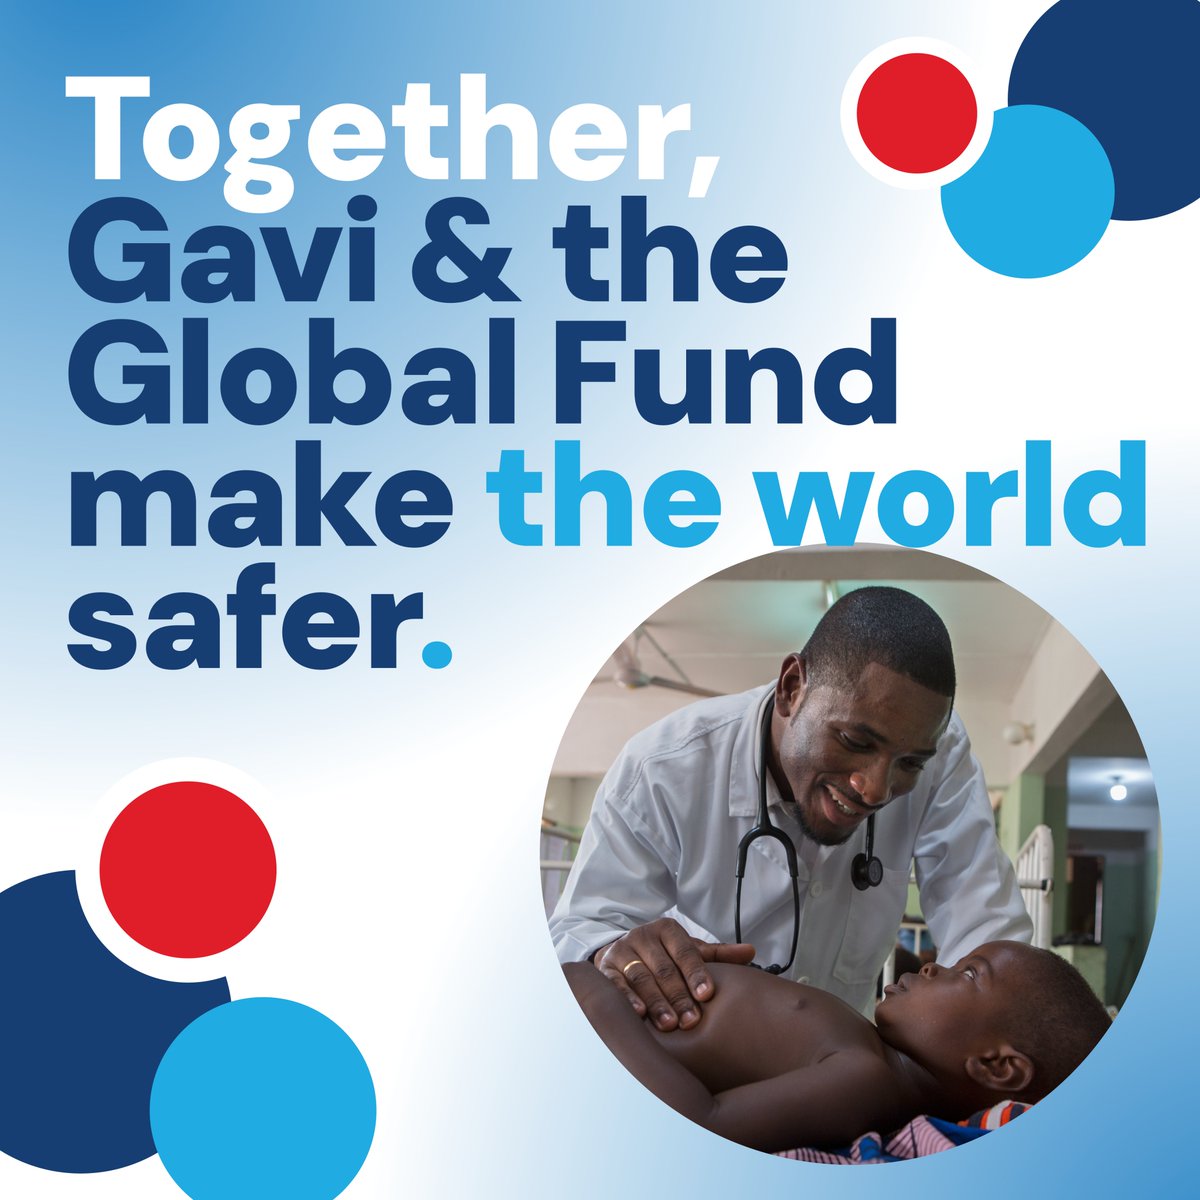 We now have two British-backed malaria vaccines being rolled out by @gavi. 💉When combined with @GlobalFund programmes, malaria vaccines can make a real difference in ending this deadly disease. To reach #ZeroMalaria the UK should continue to boldly fund both organisations. 🌐